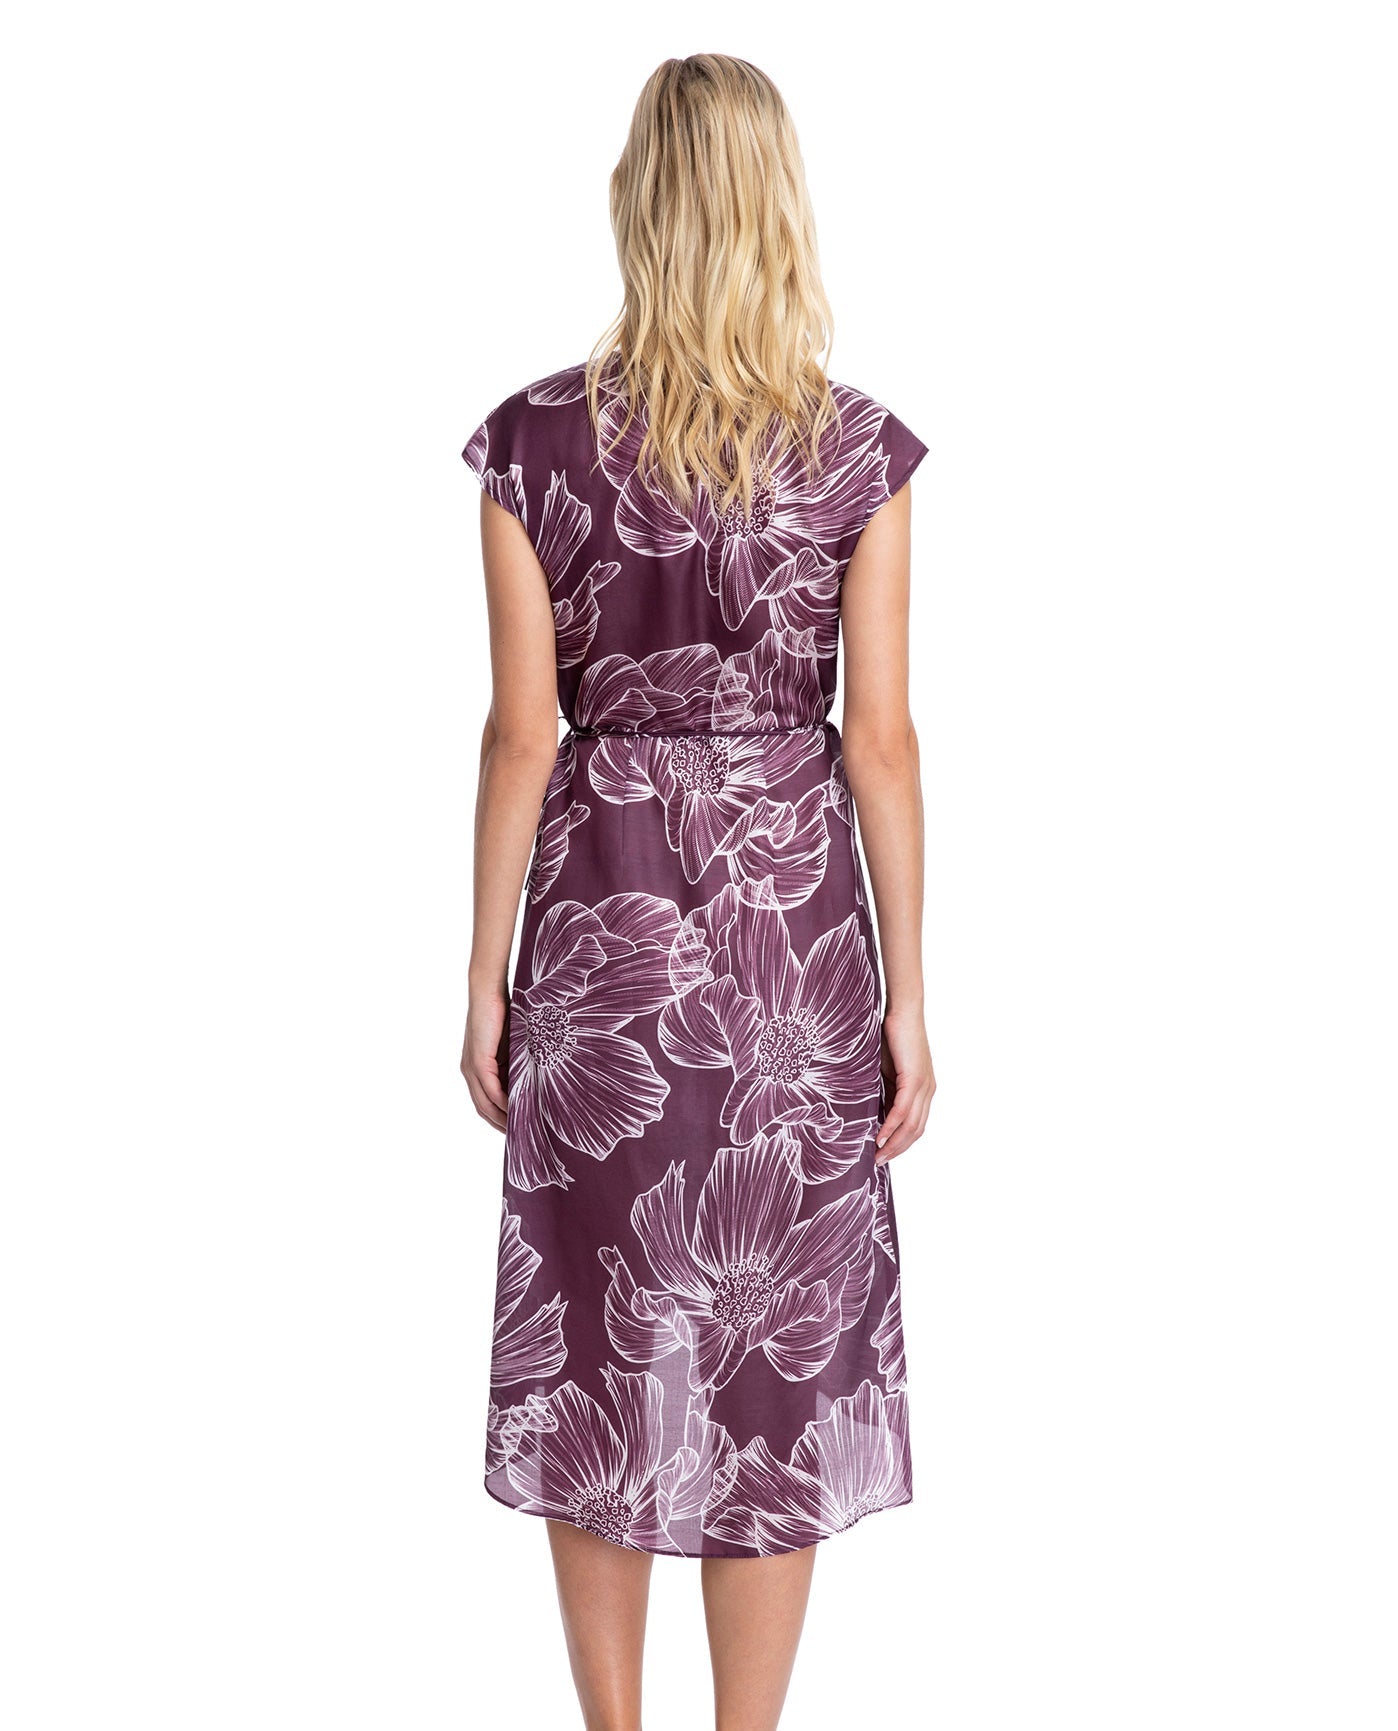 Back View Of Gottex Collection Lily Tie Front Long Surplice Wrap Cover Up Dress | Gottex Lily Wine